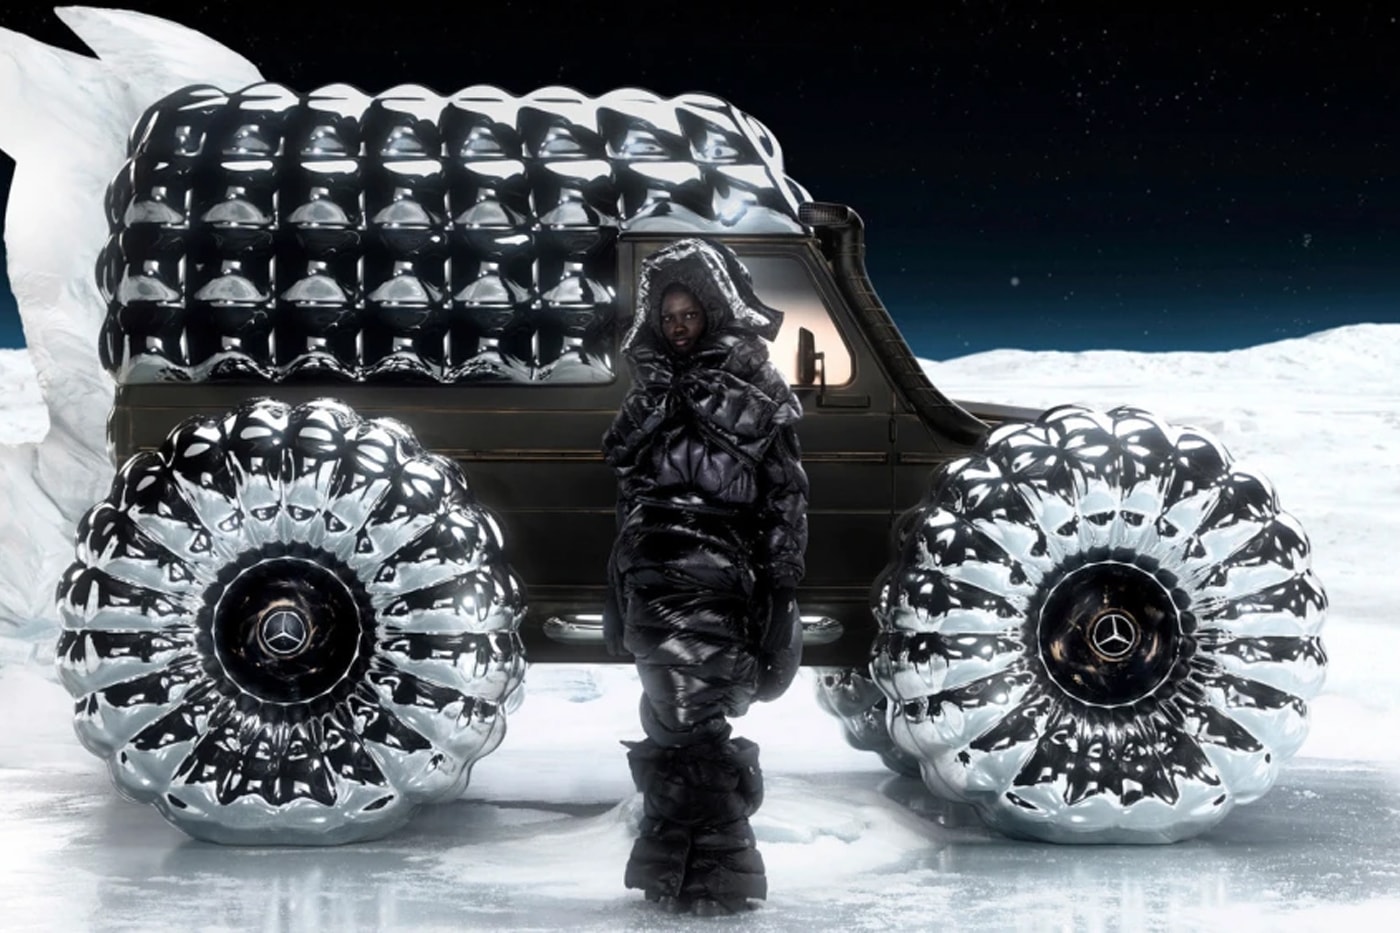 Mercedes Benz and Moncler Motor on With Collaborative Reimagination of the G-Class